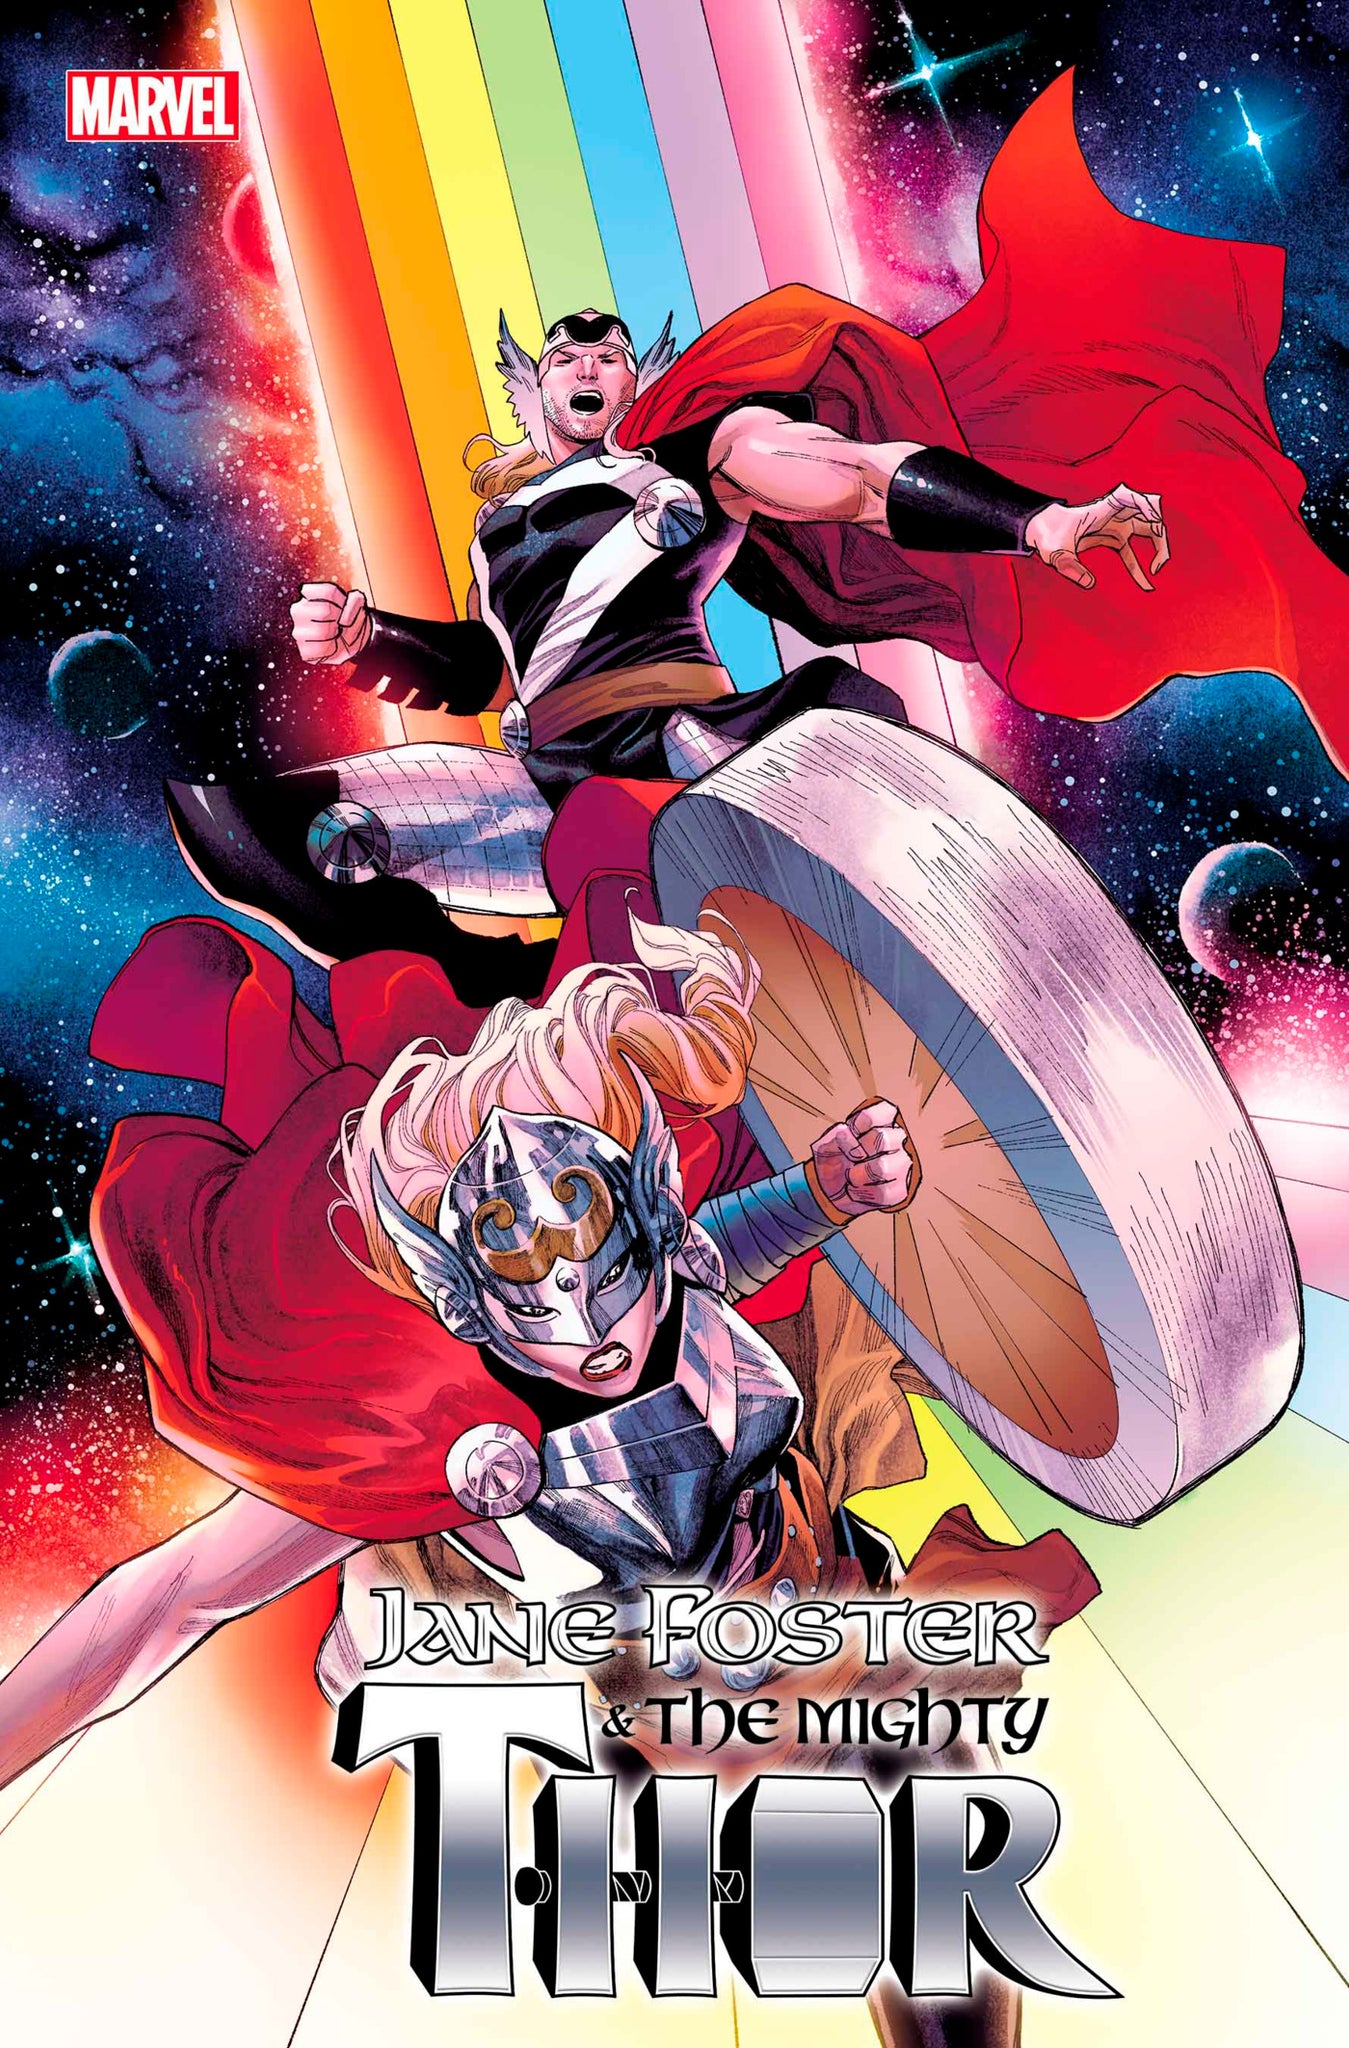 JANE FOSTER & THE MIGHTY THOR 1 COCCOLO VARIANT[1:25]